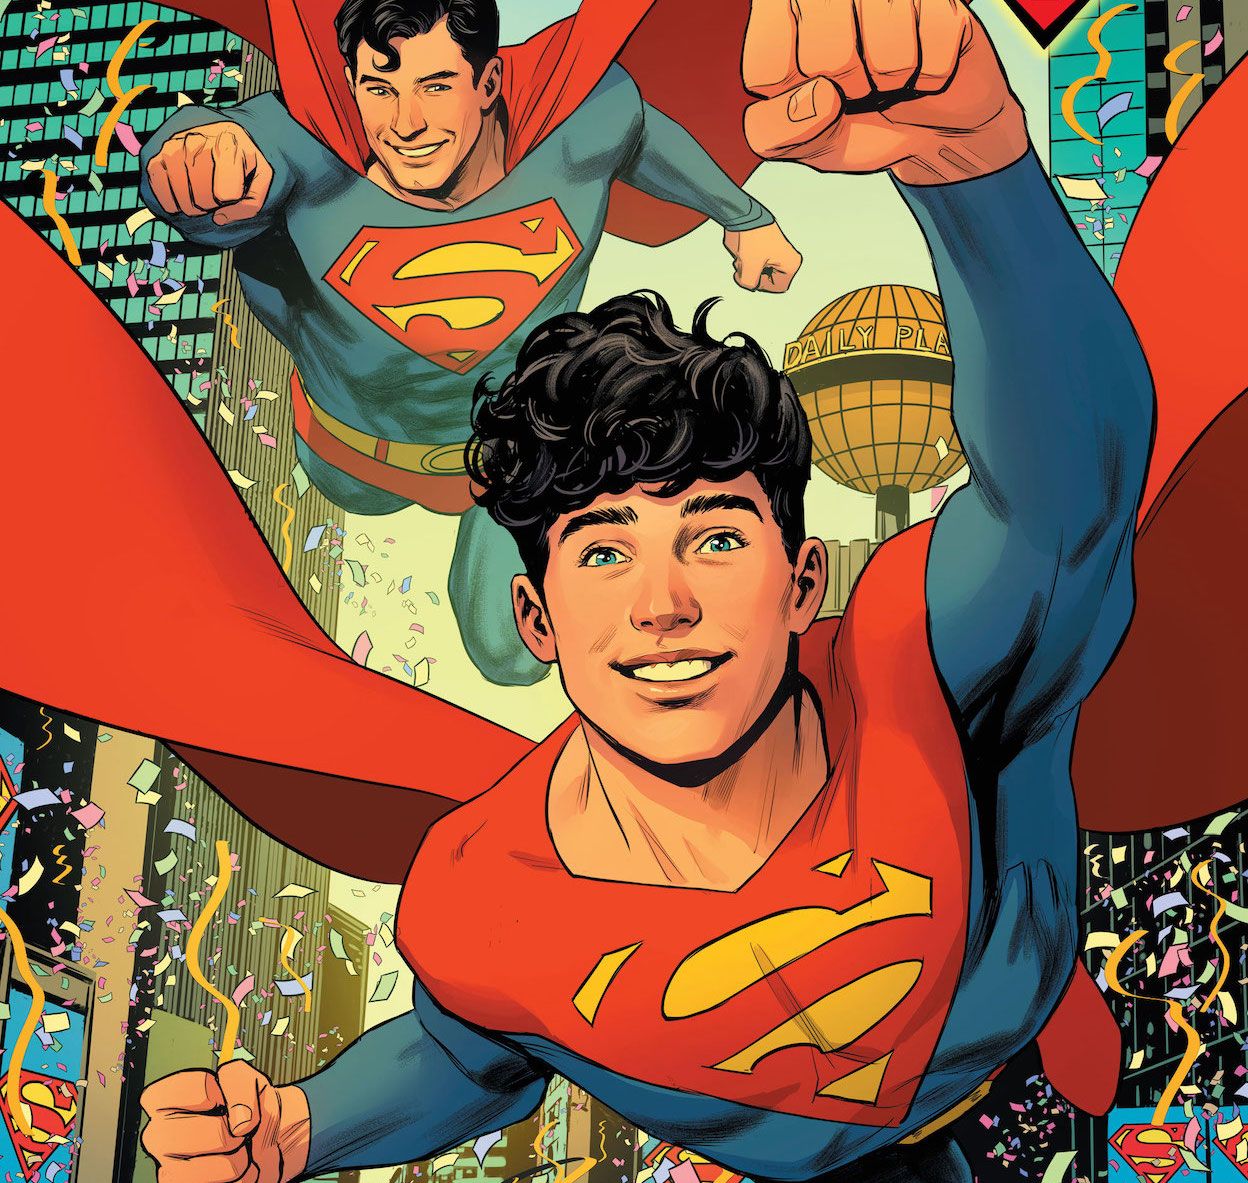 'Superman: Son of Kal-El' #16 continues to be a heartwarming and wholesome series